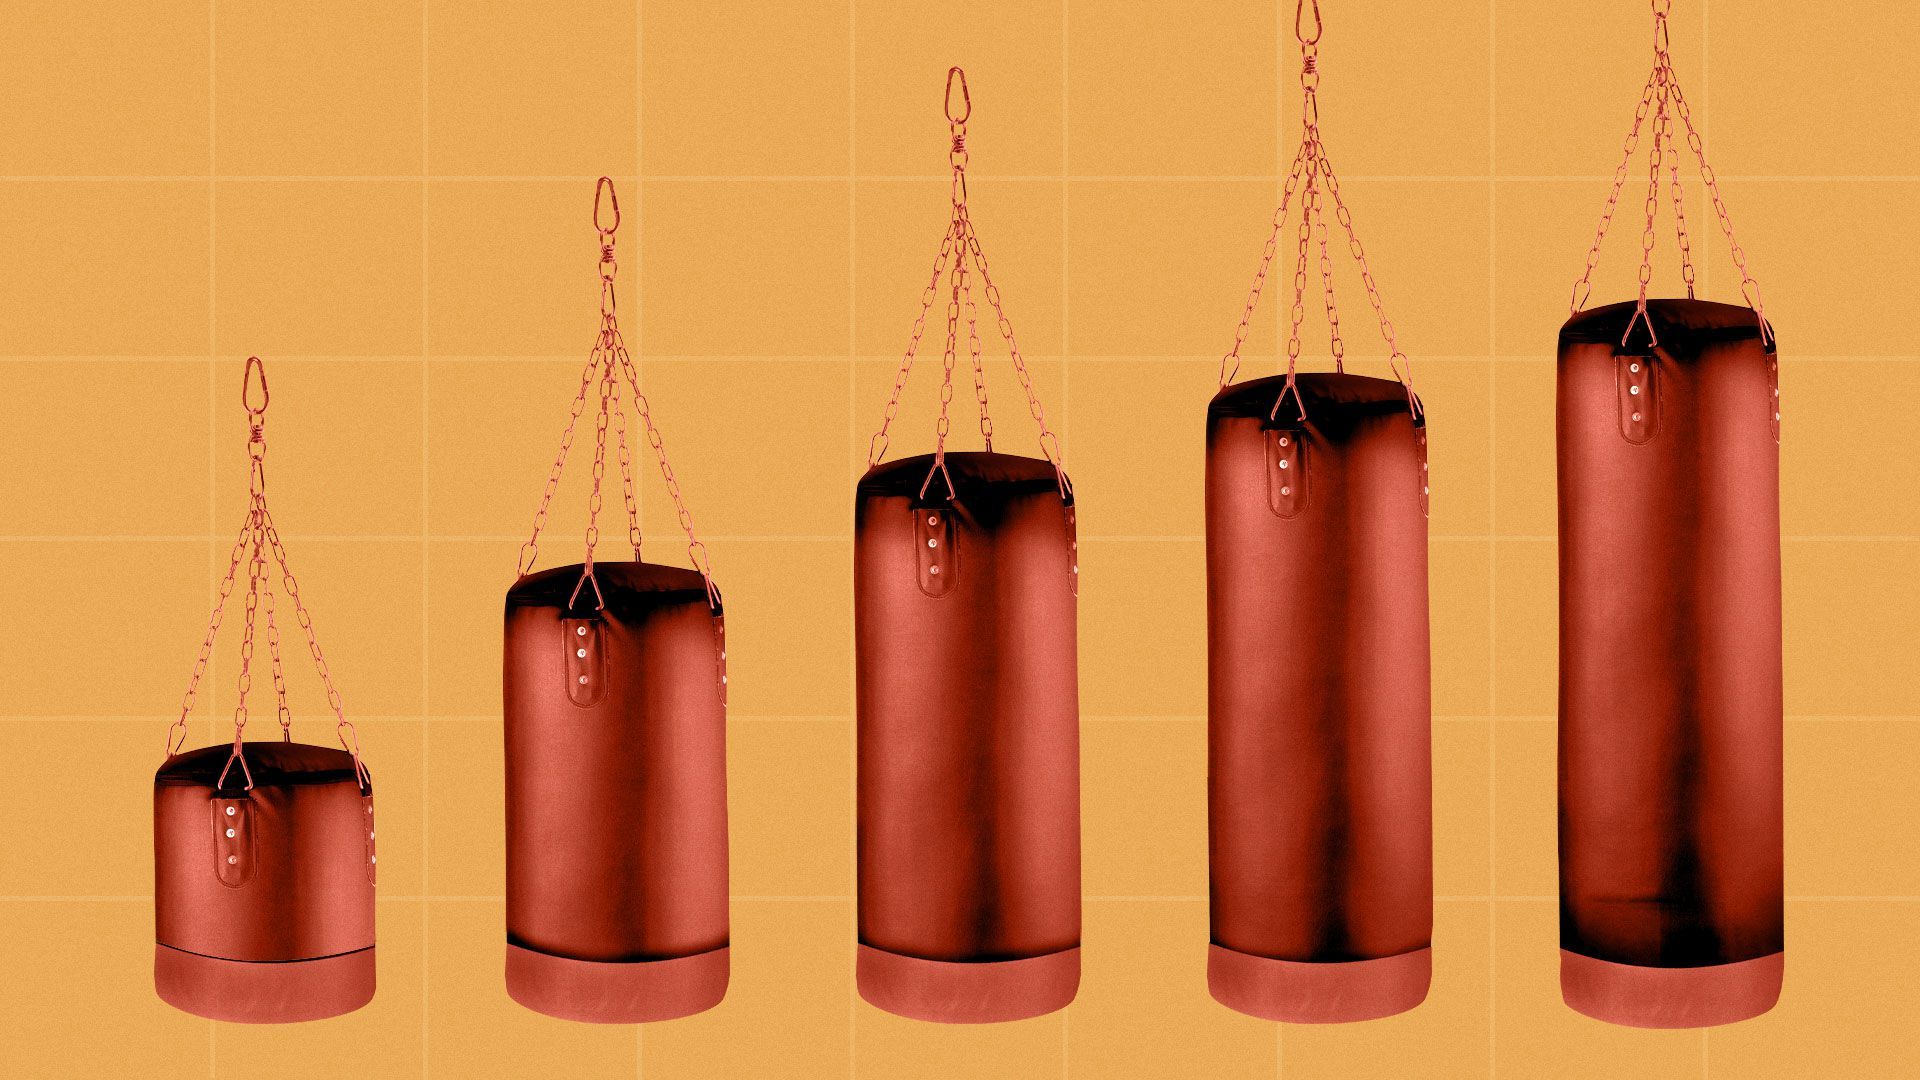 Illustration of an upward trending bar graph made of boxing bags